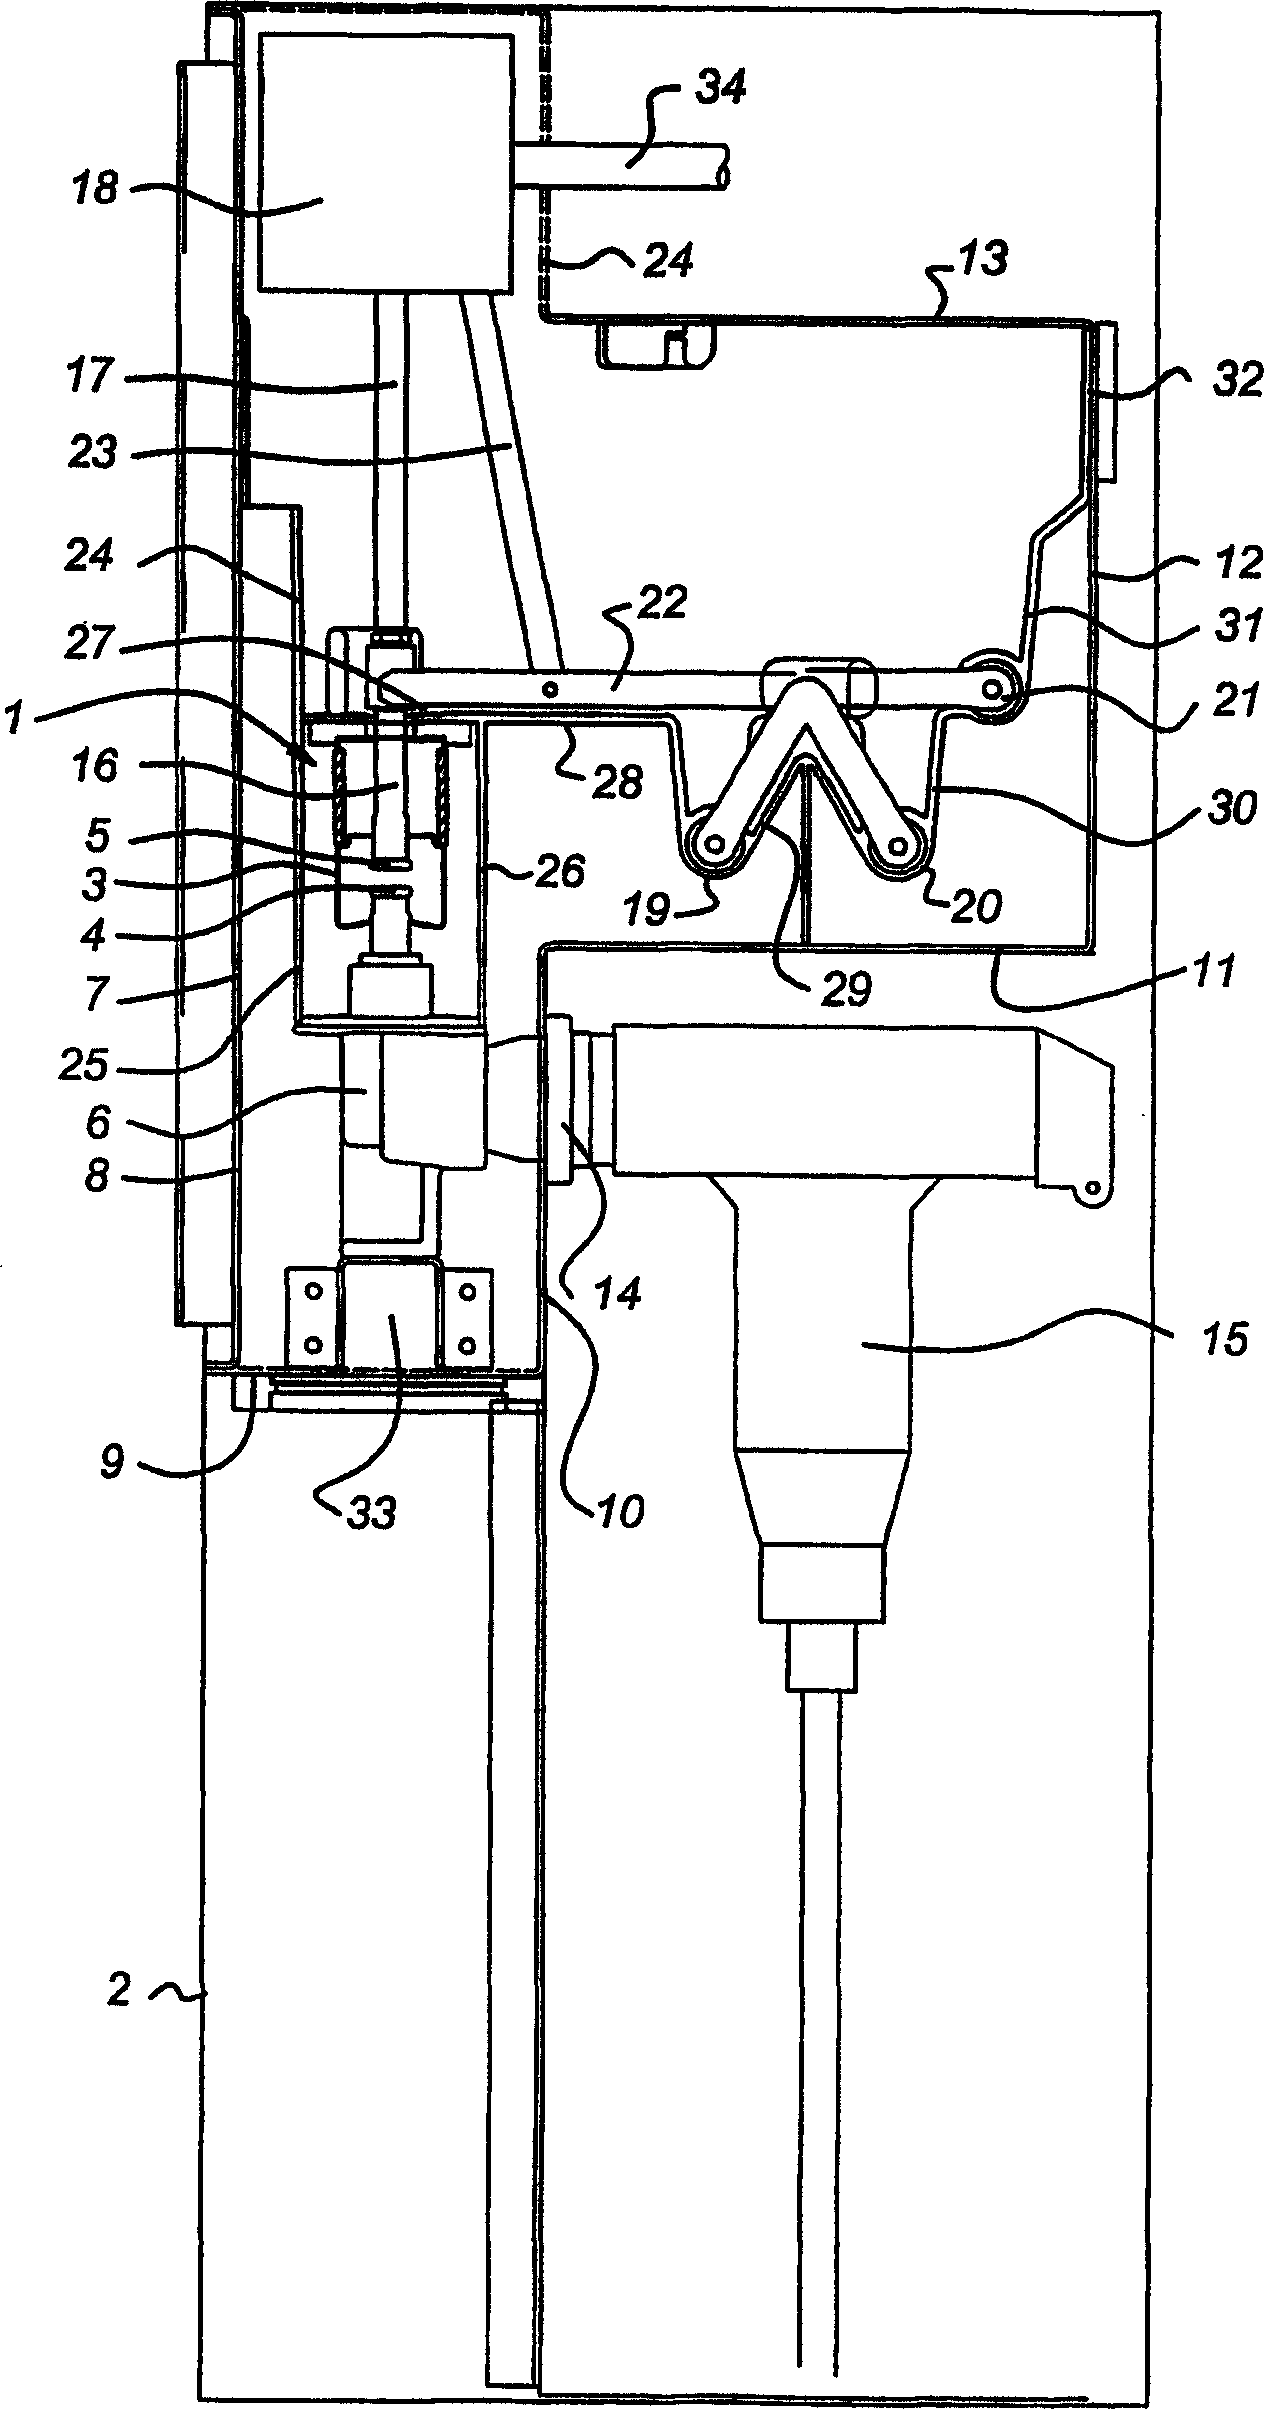 Single phase or polyphase switchgear in enveloping housing